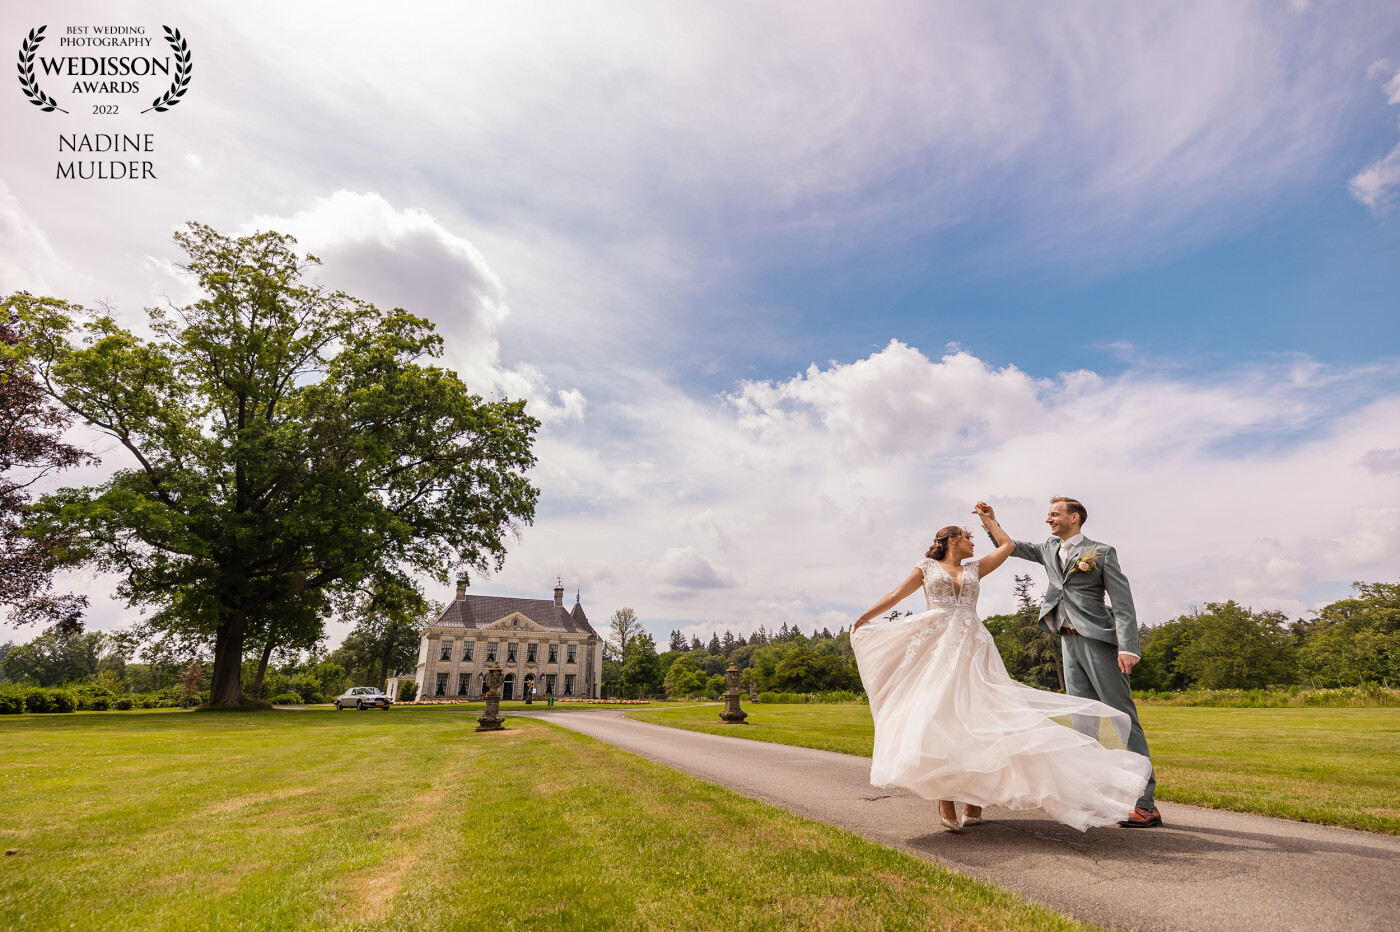 This wedding dress asked for lots of dancing. The materials and the wind are a perfect combination. And look at this location and sky, isn't it amazing?